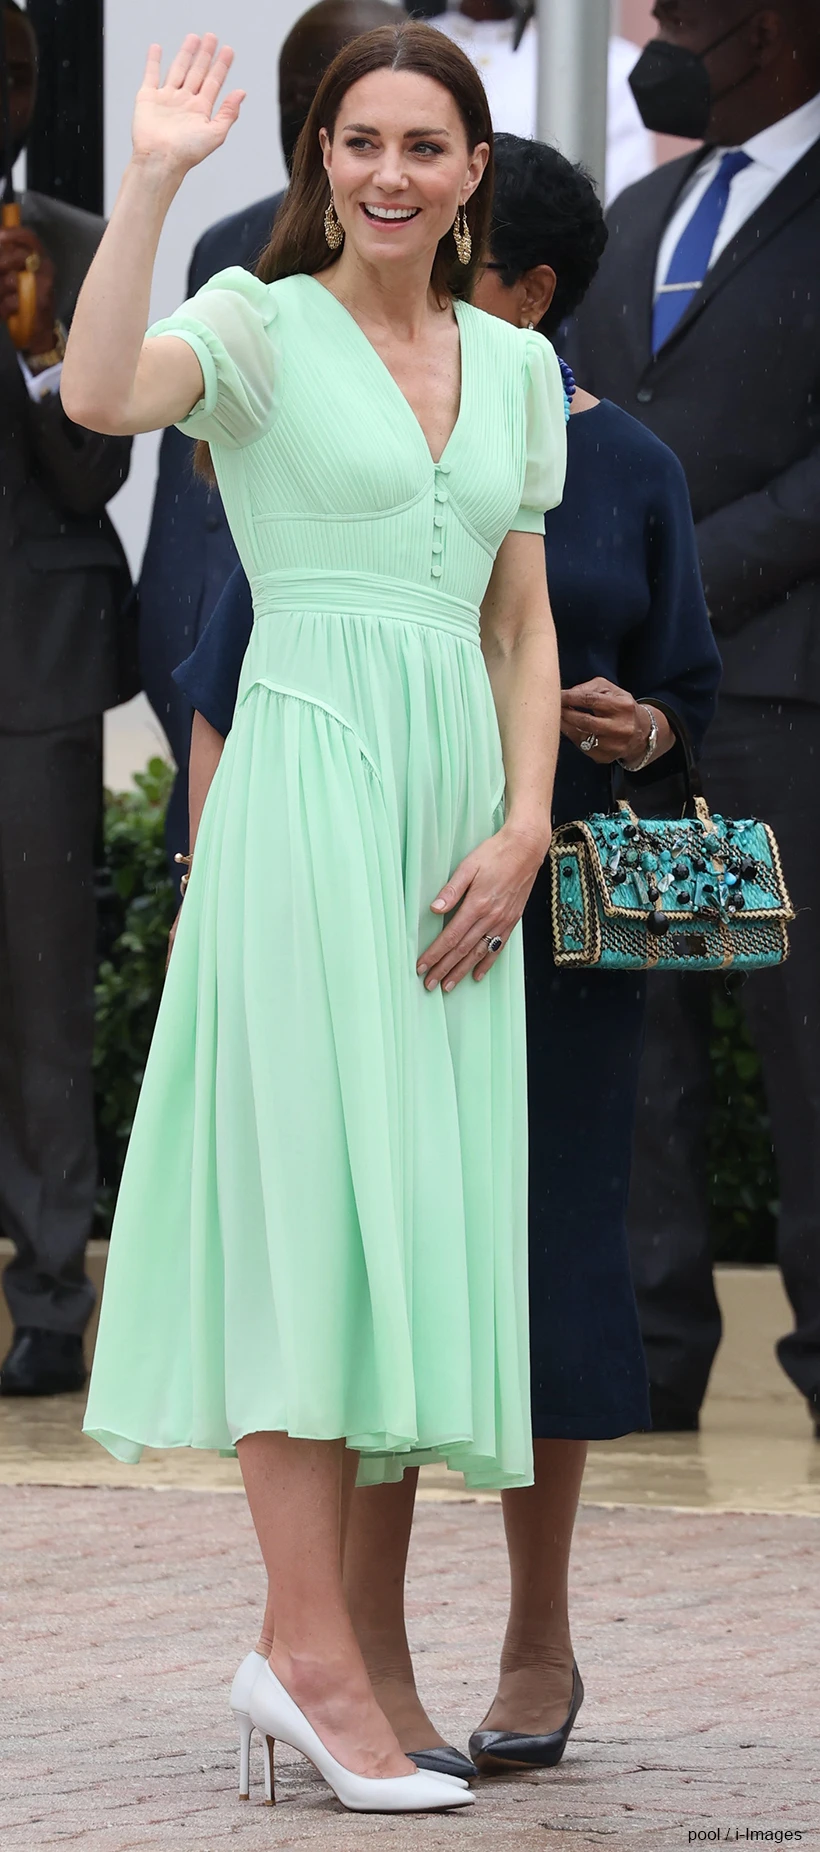 Kate Middleton's Mint Green Dress by Self Portrait - Worn In The Bahamas